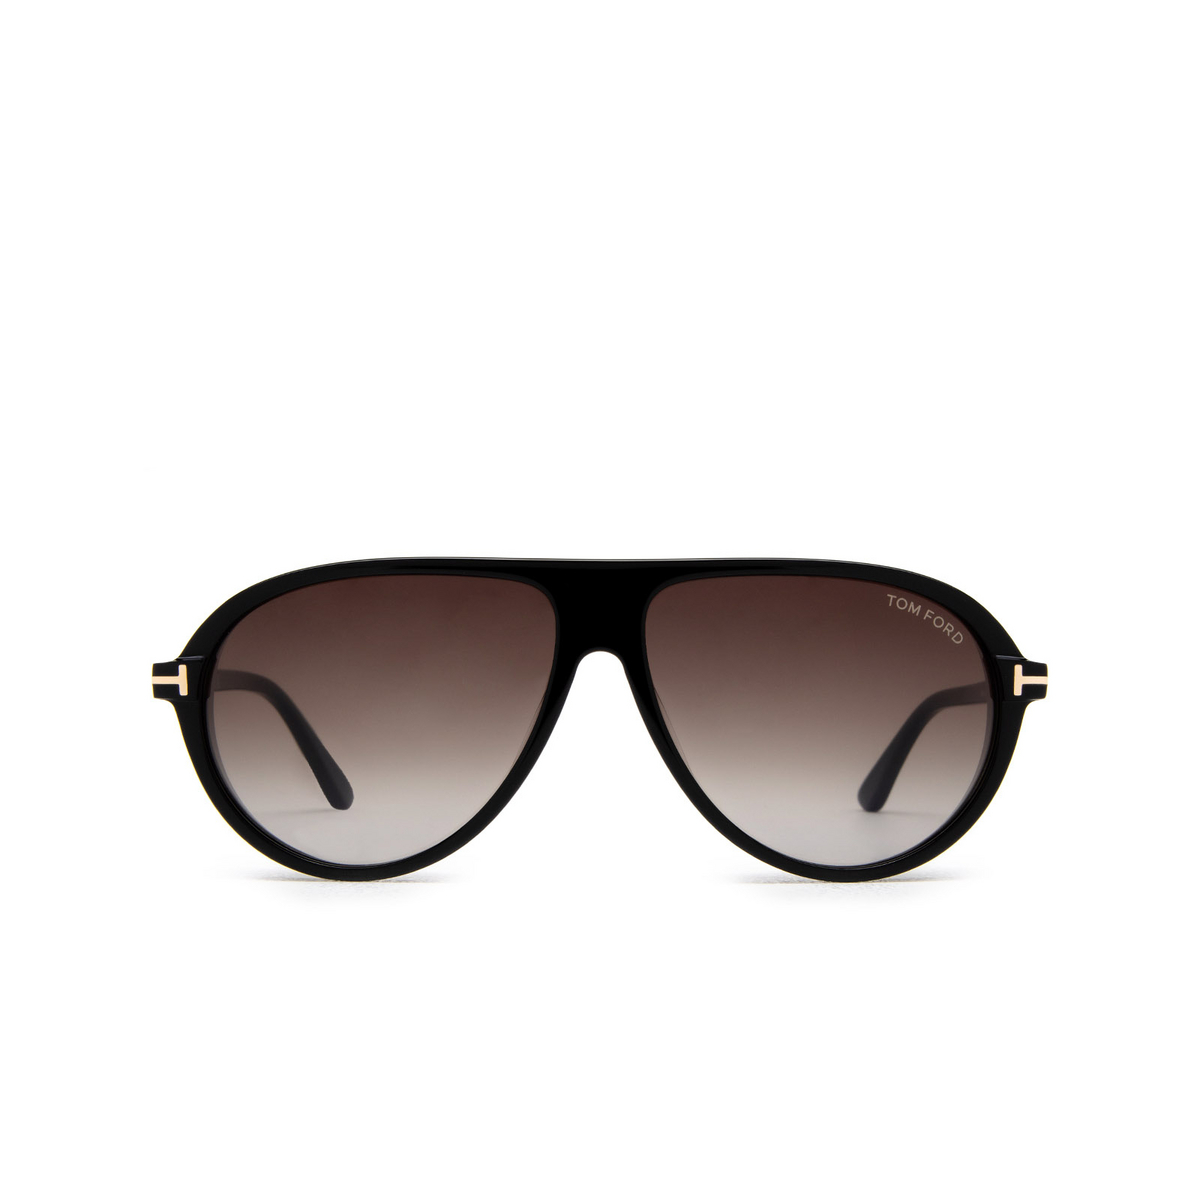 Tom Ford MARCUS Sunglasses 01B Shiny Black - front view